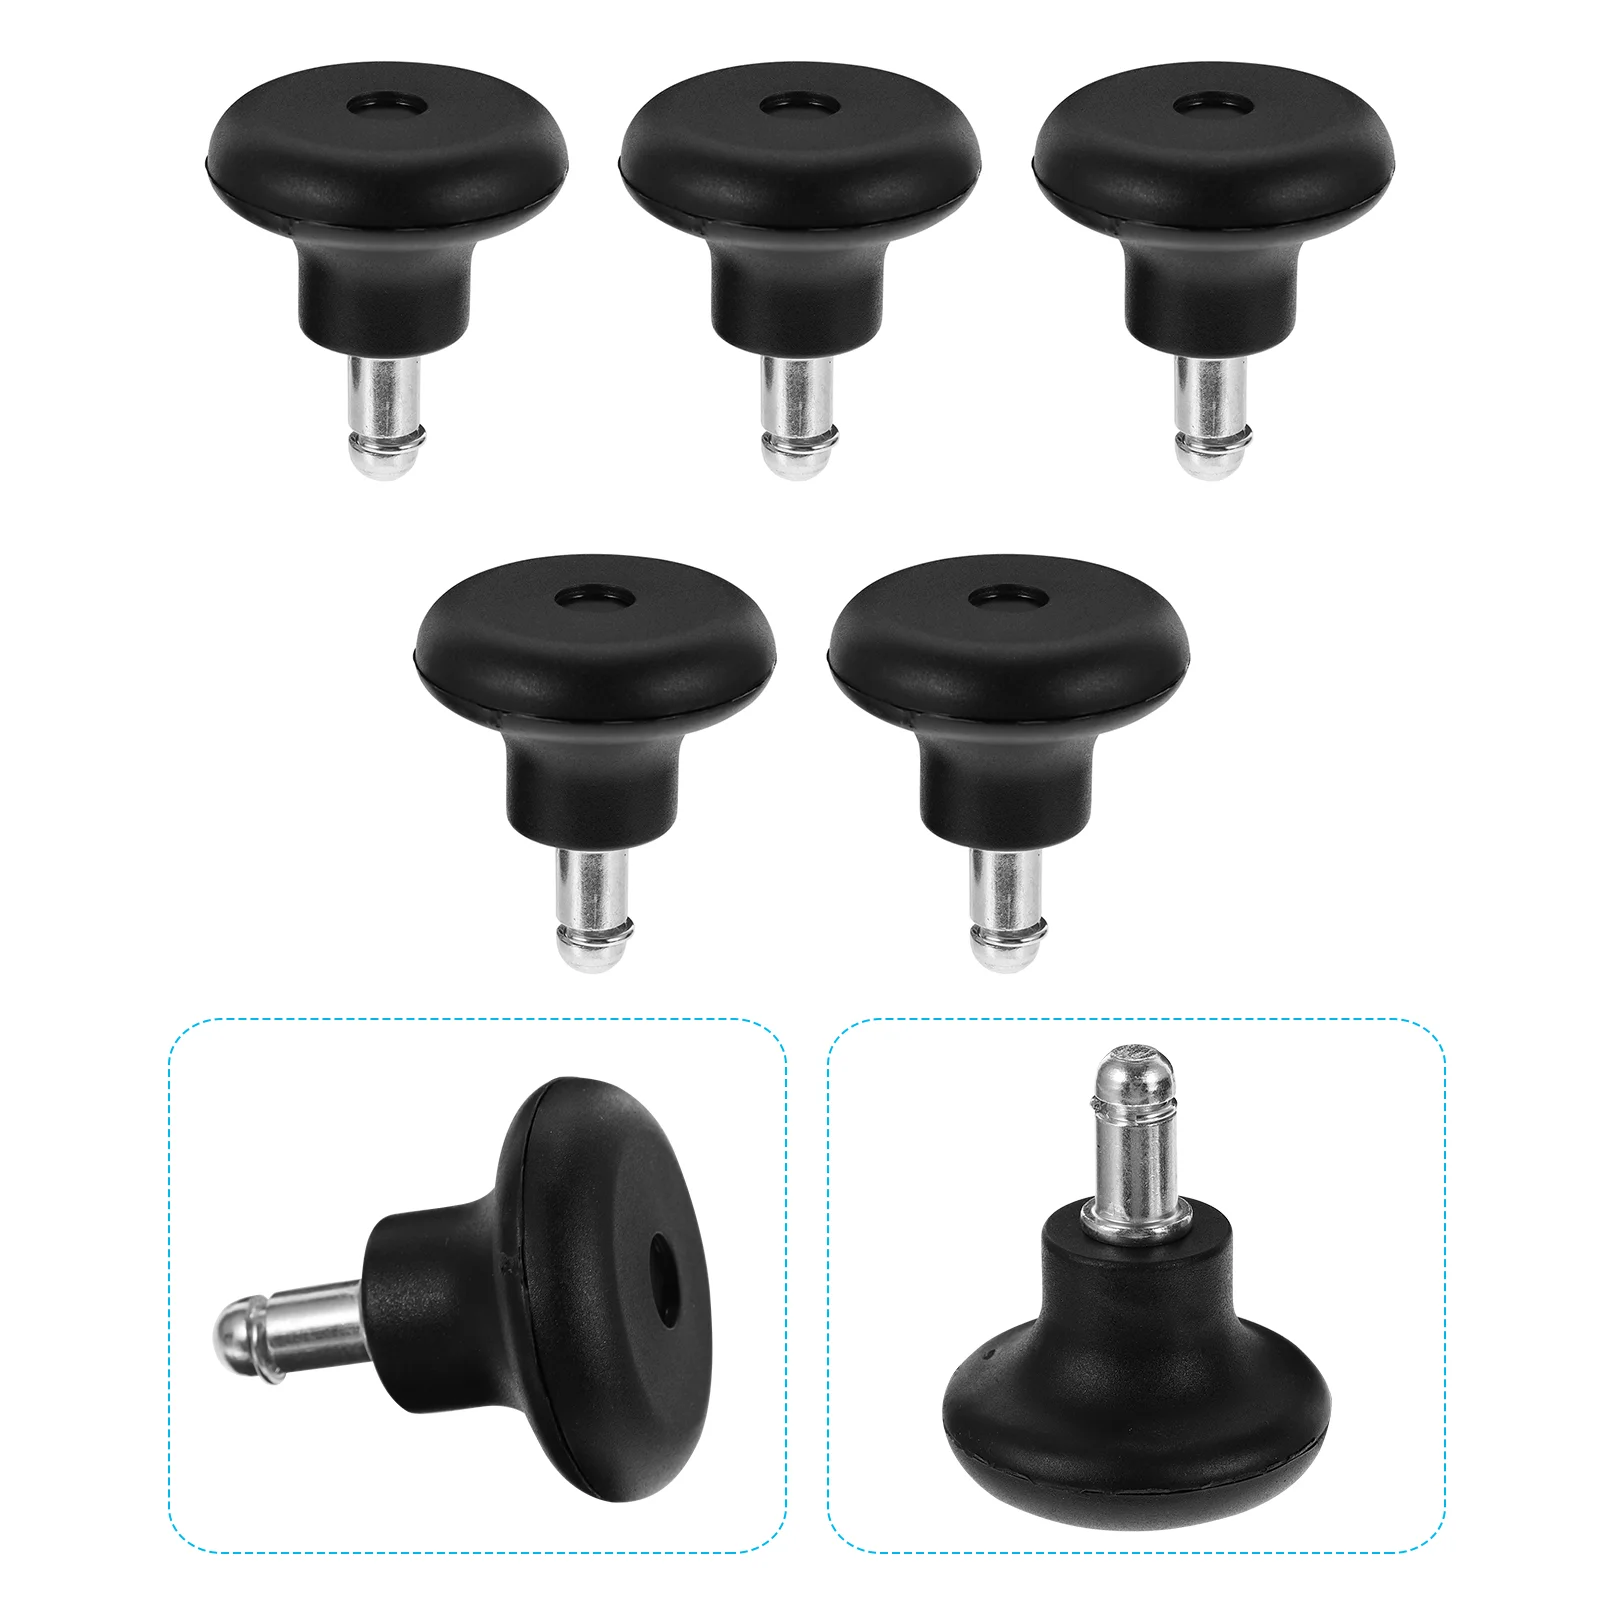 1 Set 5Pcs 2in Office Chair Wheels Practical PU Chair Fixed Casters (Black) dollhouse 1 12 scale miniature furniture black pu hand carved chair set